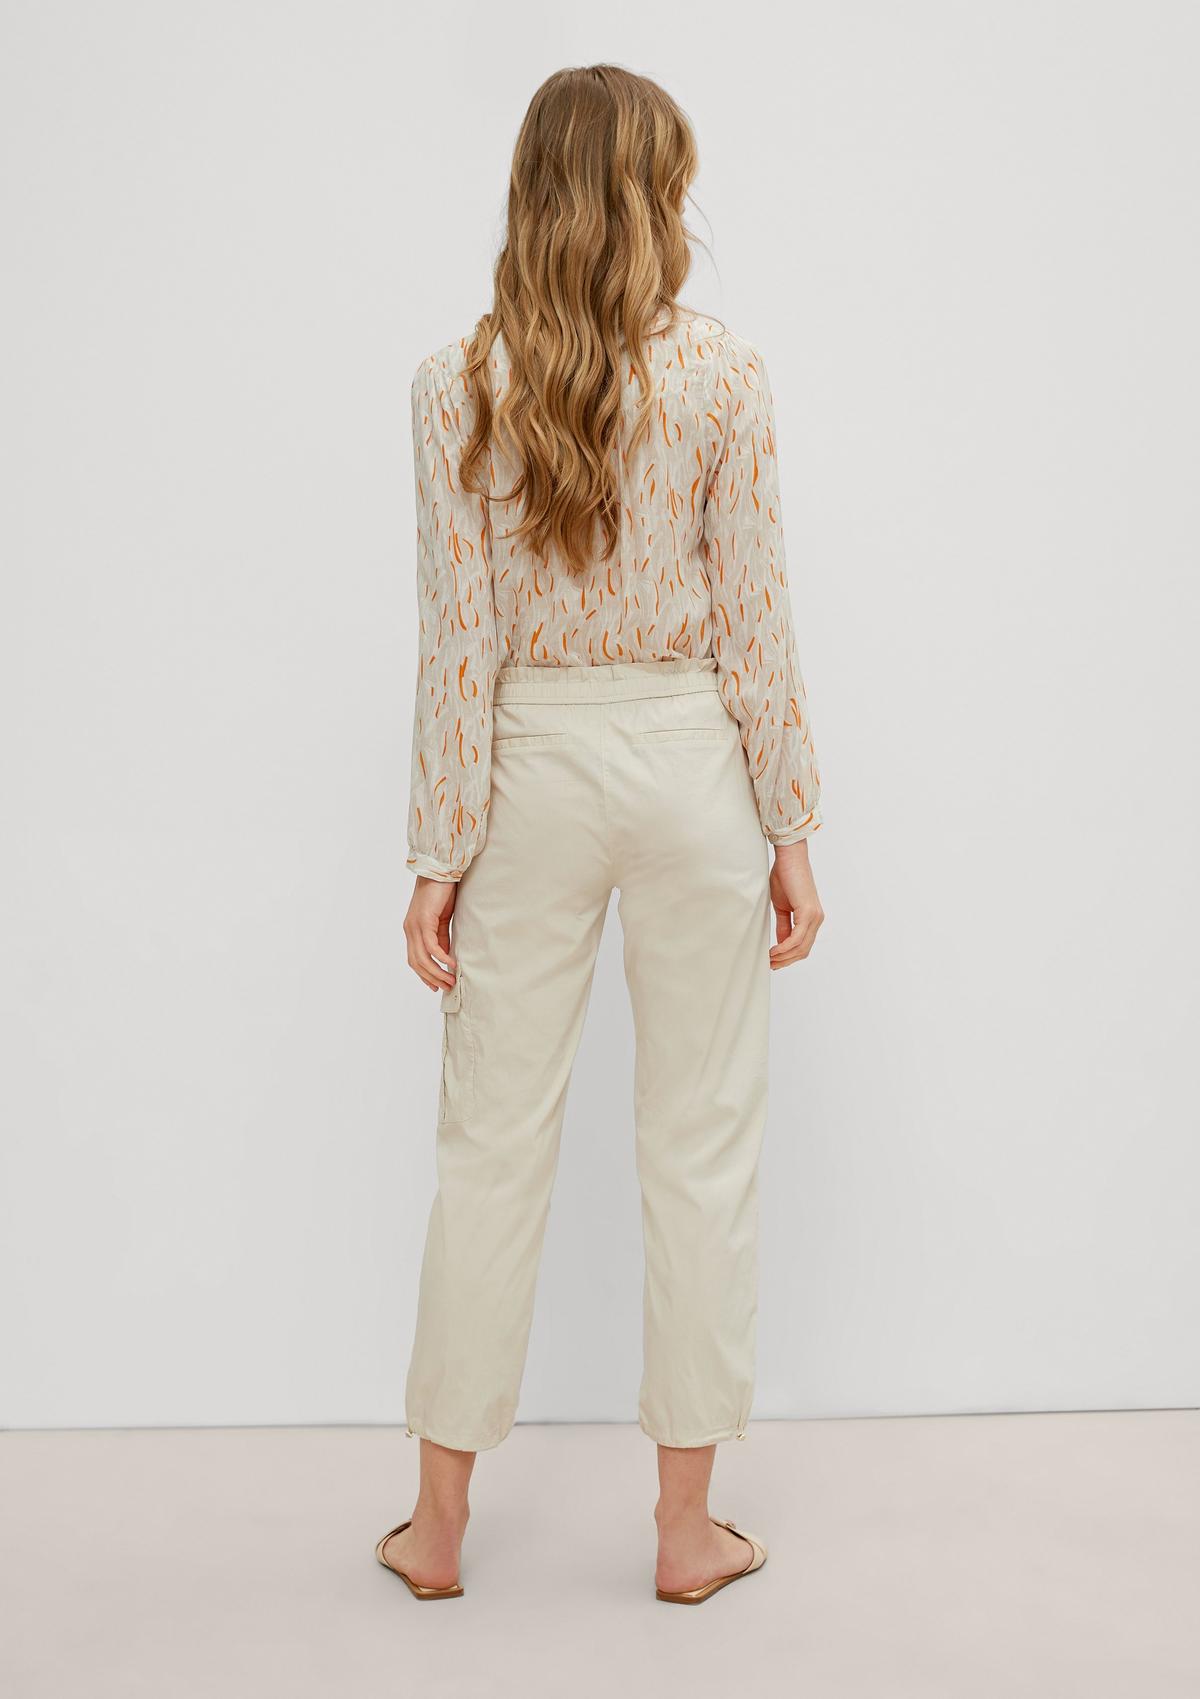 Relaxed: trousers with an elasticated frilled waistband - light beige